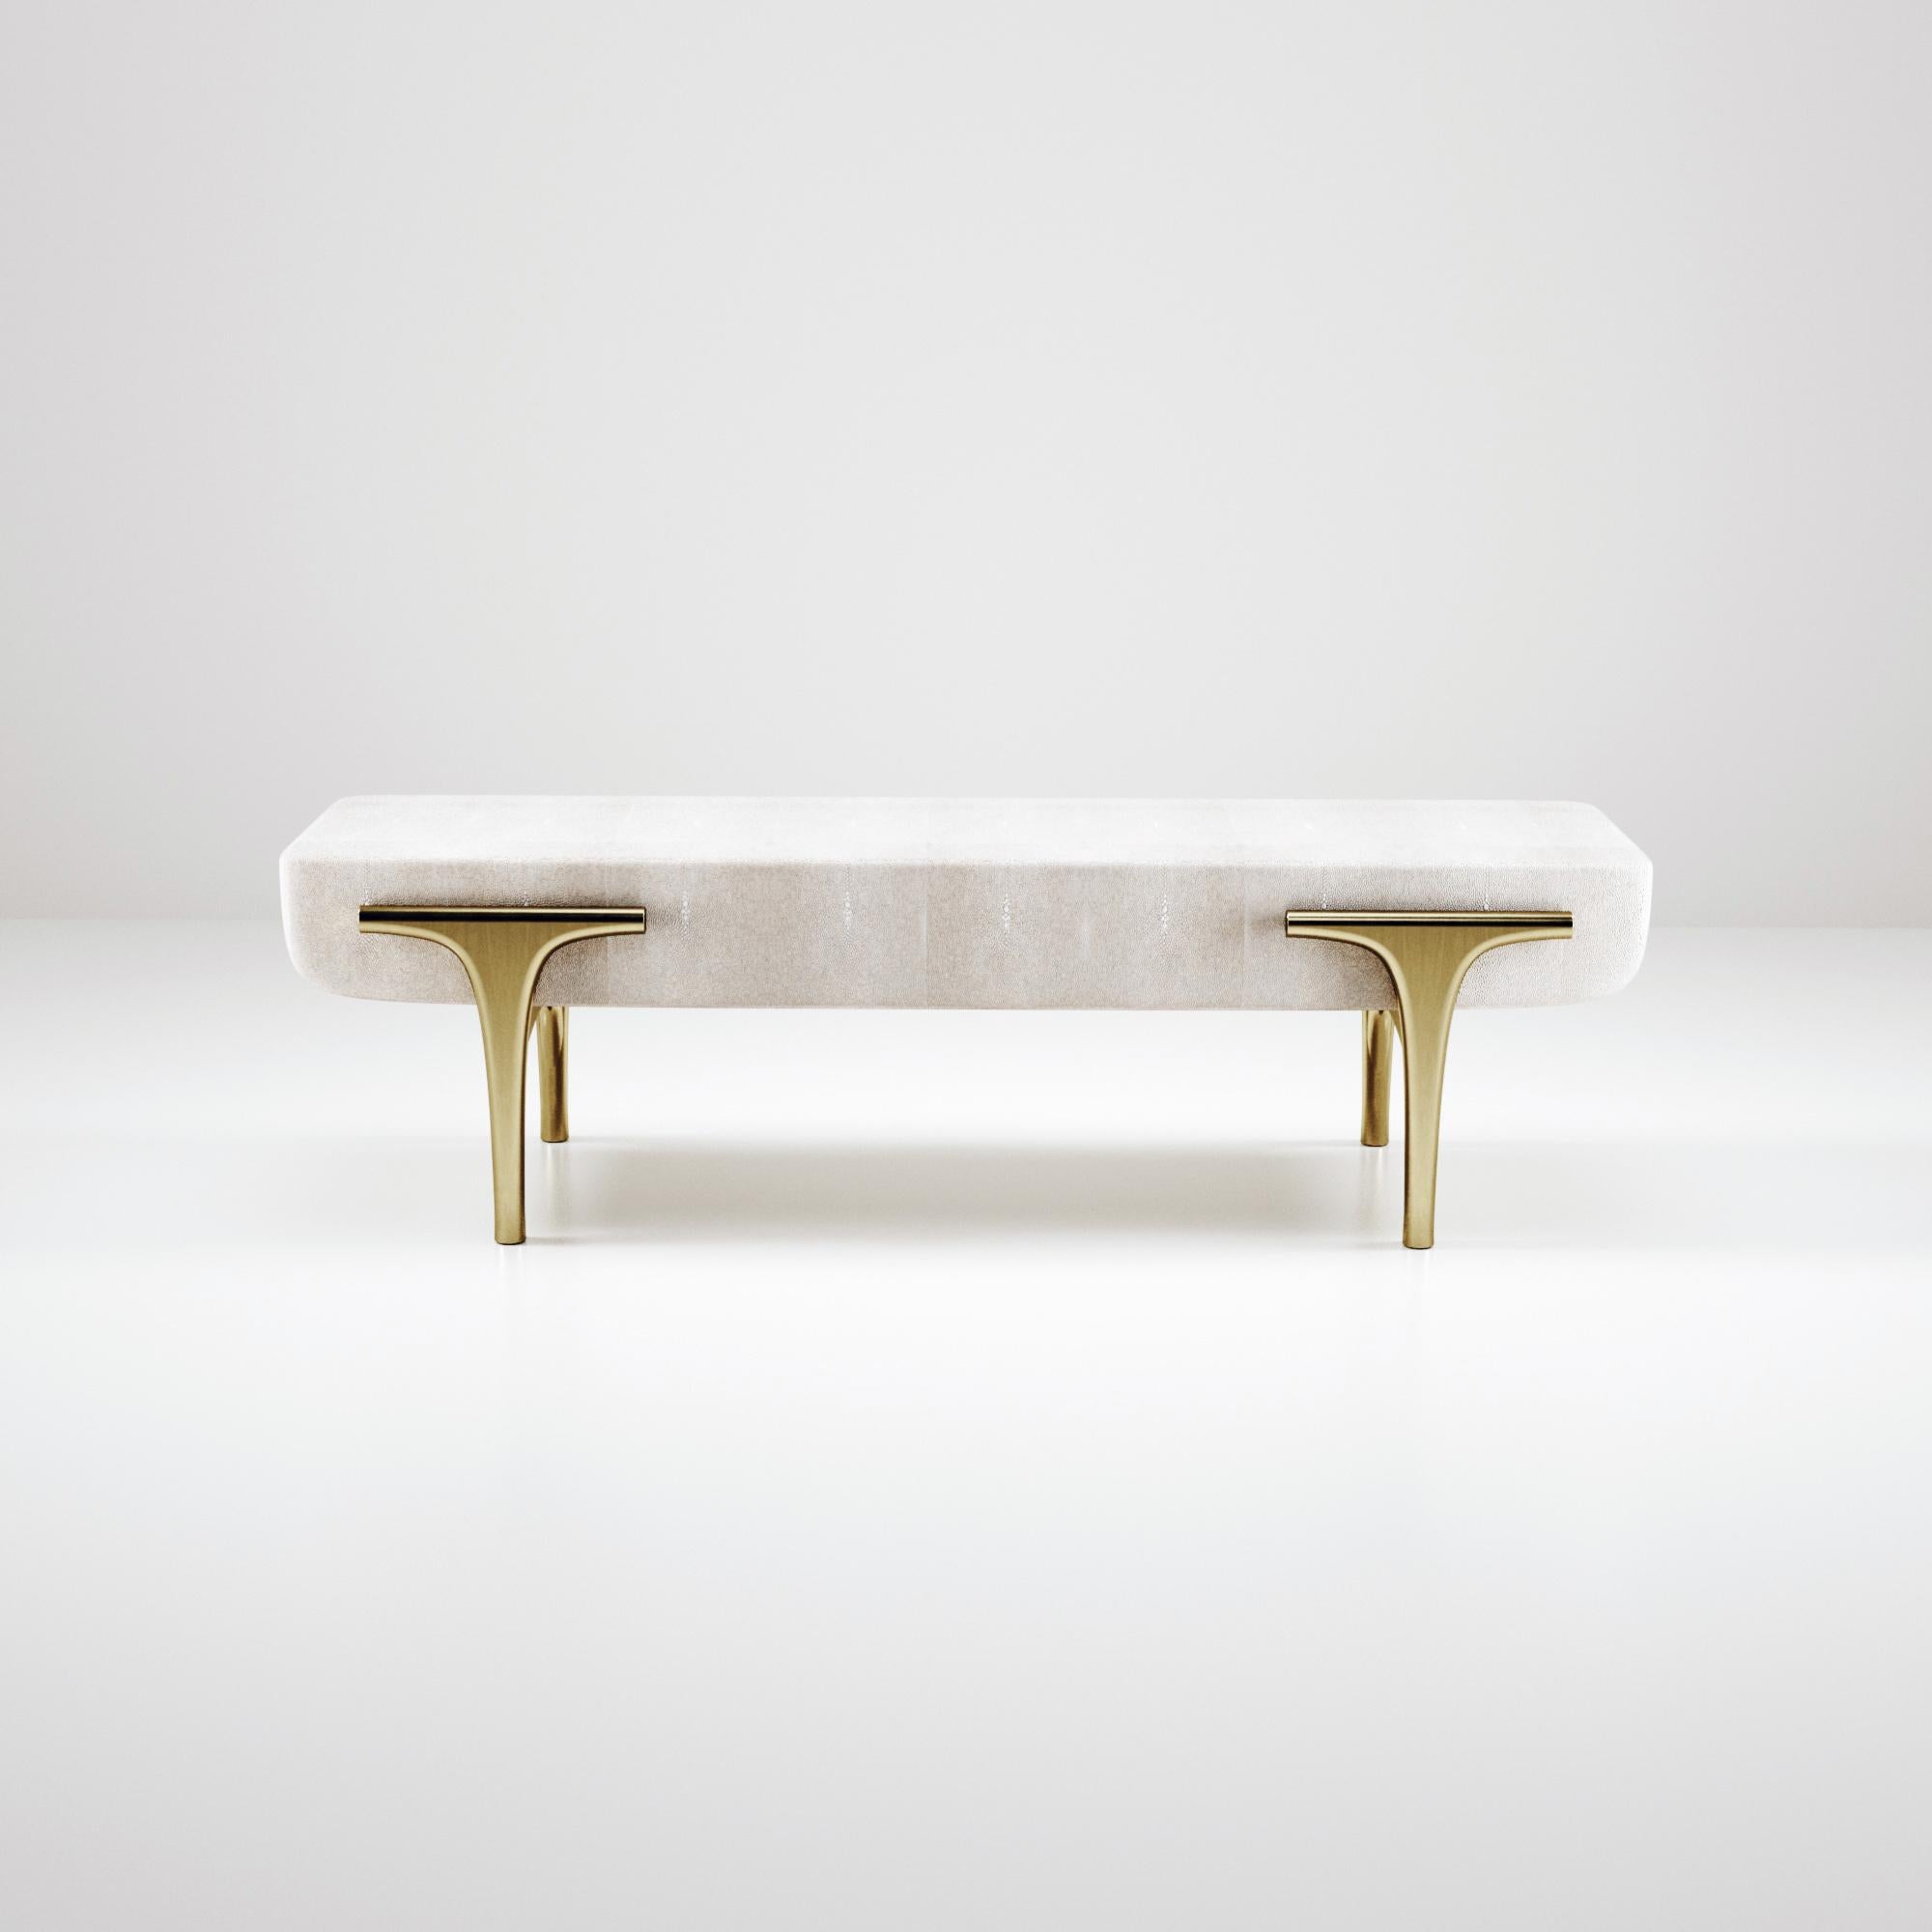 The Ramo Bench by R & Y Augousti is an elegant and versatile piece. The cream shagreen inlaid piece provides comfort while retaining a unique aesthetic with the bronze-patina brass frame and details. This listing is priced for shagreen inlay, see